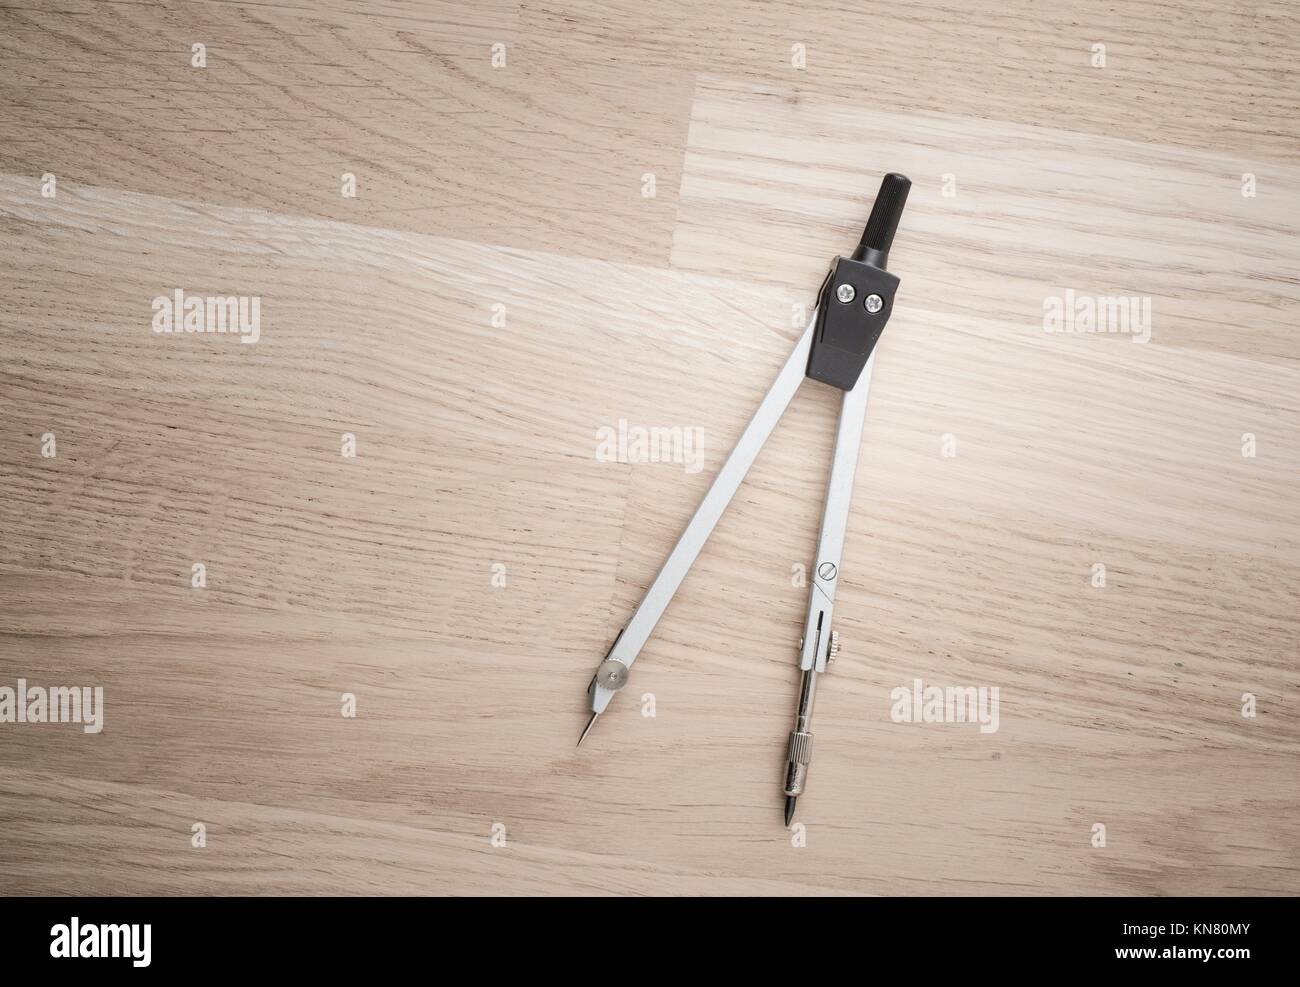 Compass used for design work or architecture lying on wooden desktop. Concept of geometry, drafting or construction planning. Stock Photo